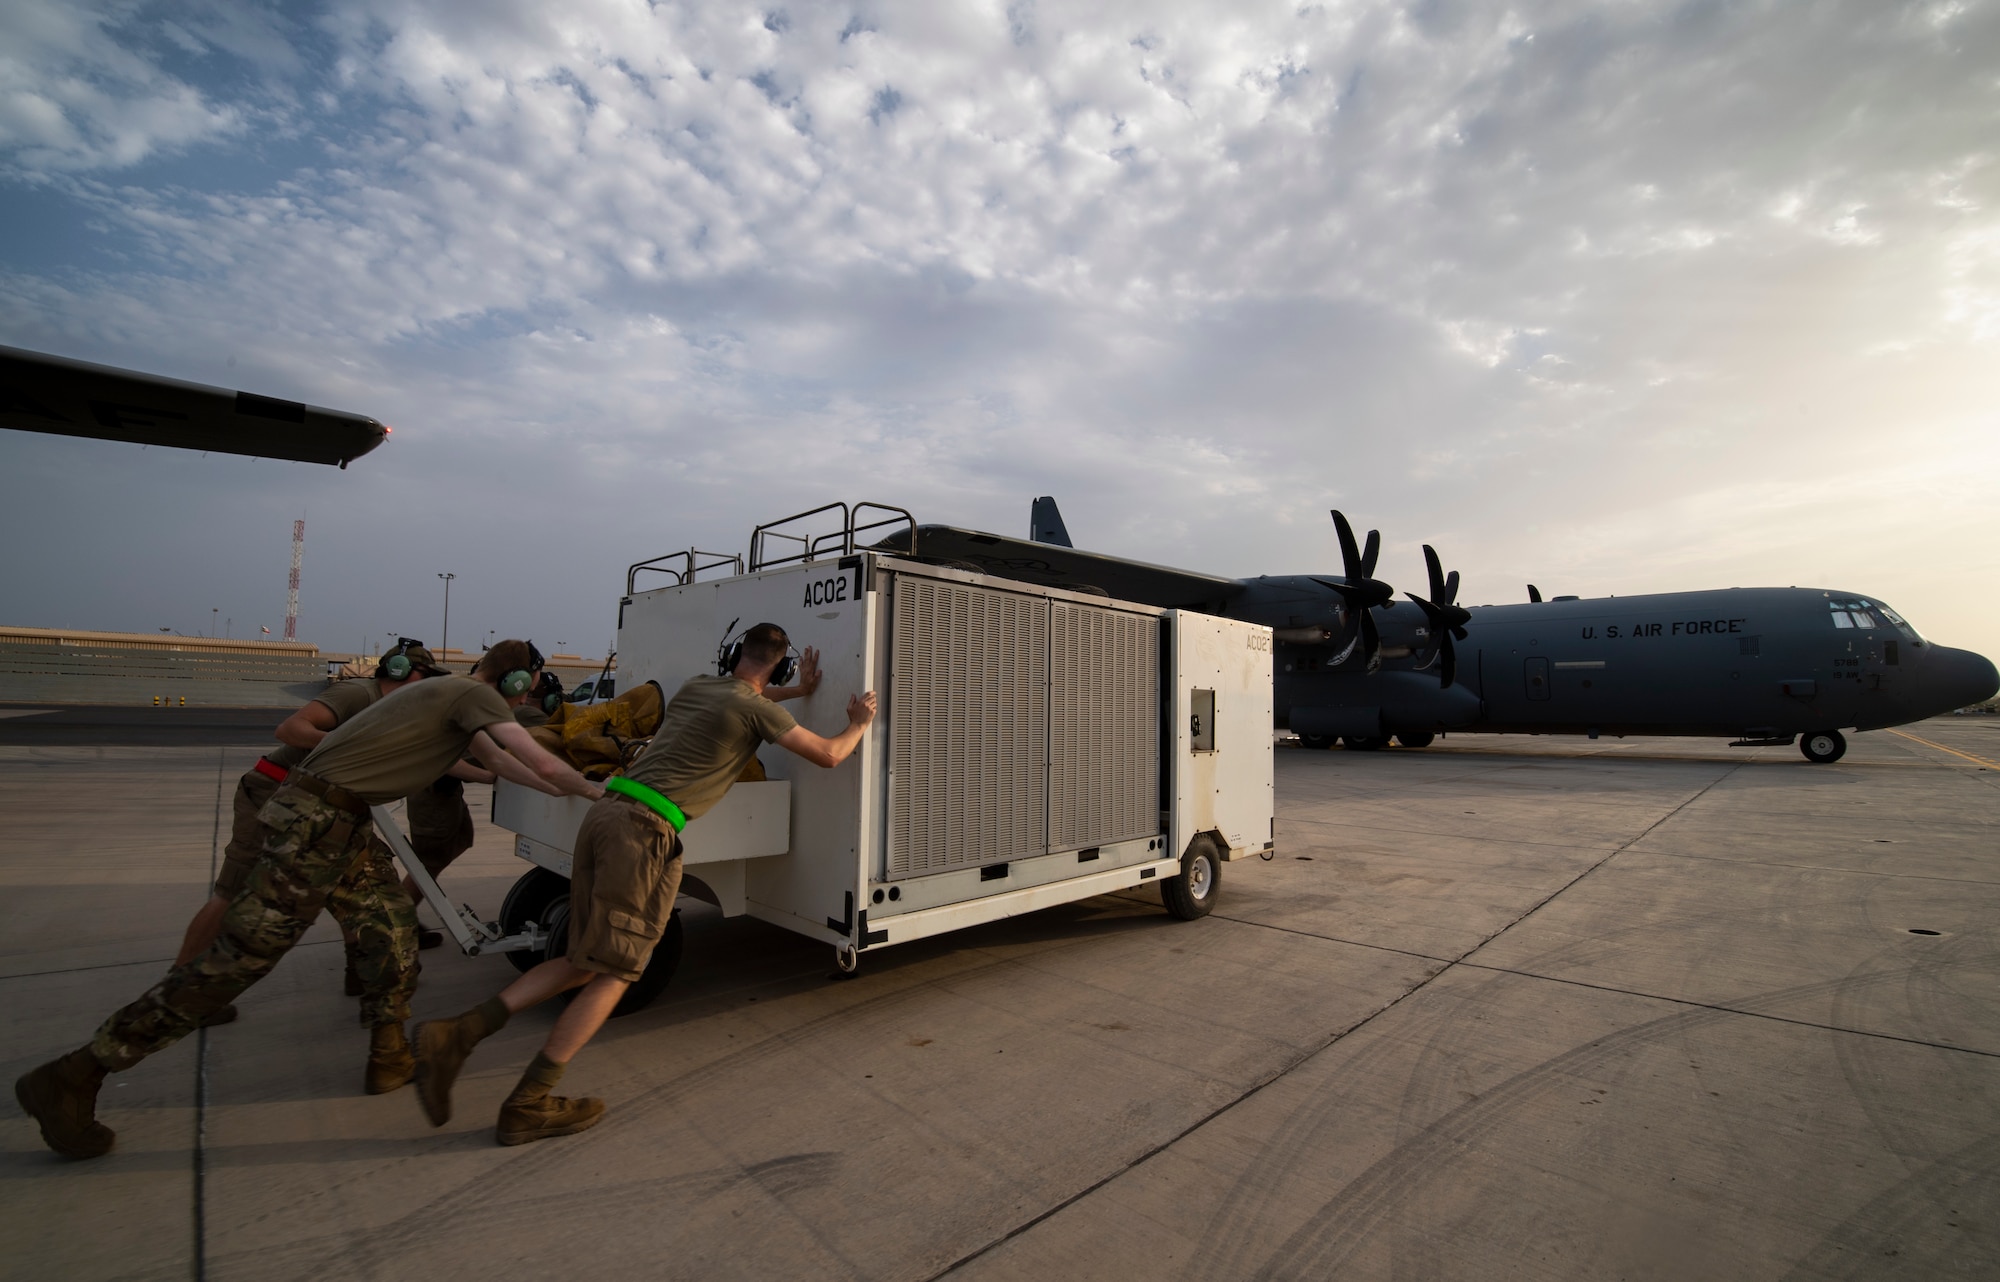 U.S. Air Force 75th Expeditionary Airlift Squadron (EAS) aircraft maintainers relocate an air conditioning unit on the flight line at Camp Lemonnier, Djibouti, June 28, 2020. The 75th EAS provides strategic airlift capabilities across the Combined Joint Task Force - Horn of Africa (CJTF-HOA) area of responsibility. (U.S. Air Force photo by Tech. Sgt. Christopher Ruano)